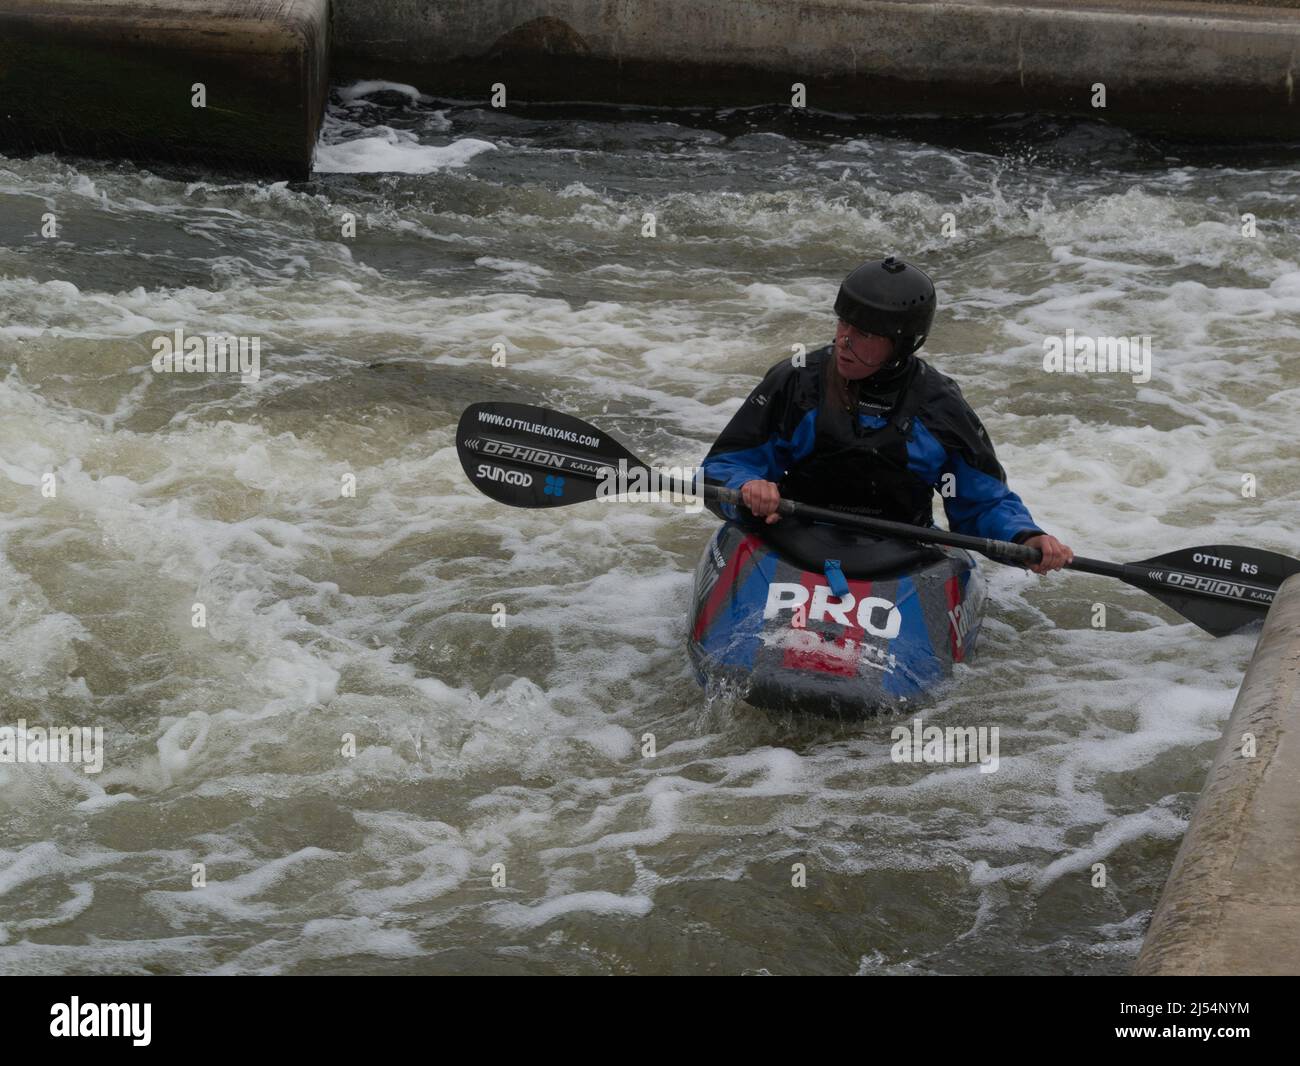 Young boy in kayak tackling white water of Holme Pierrepont Country Park Nottingham England UK paddling against current National Water Sports Centre Stock Photo